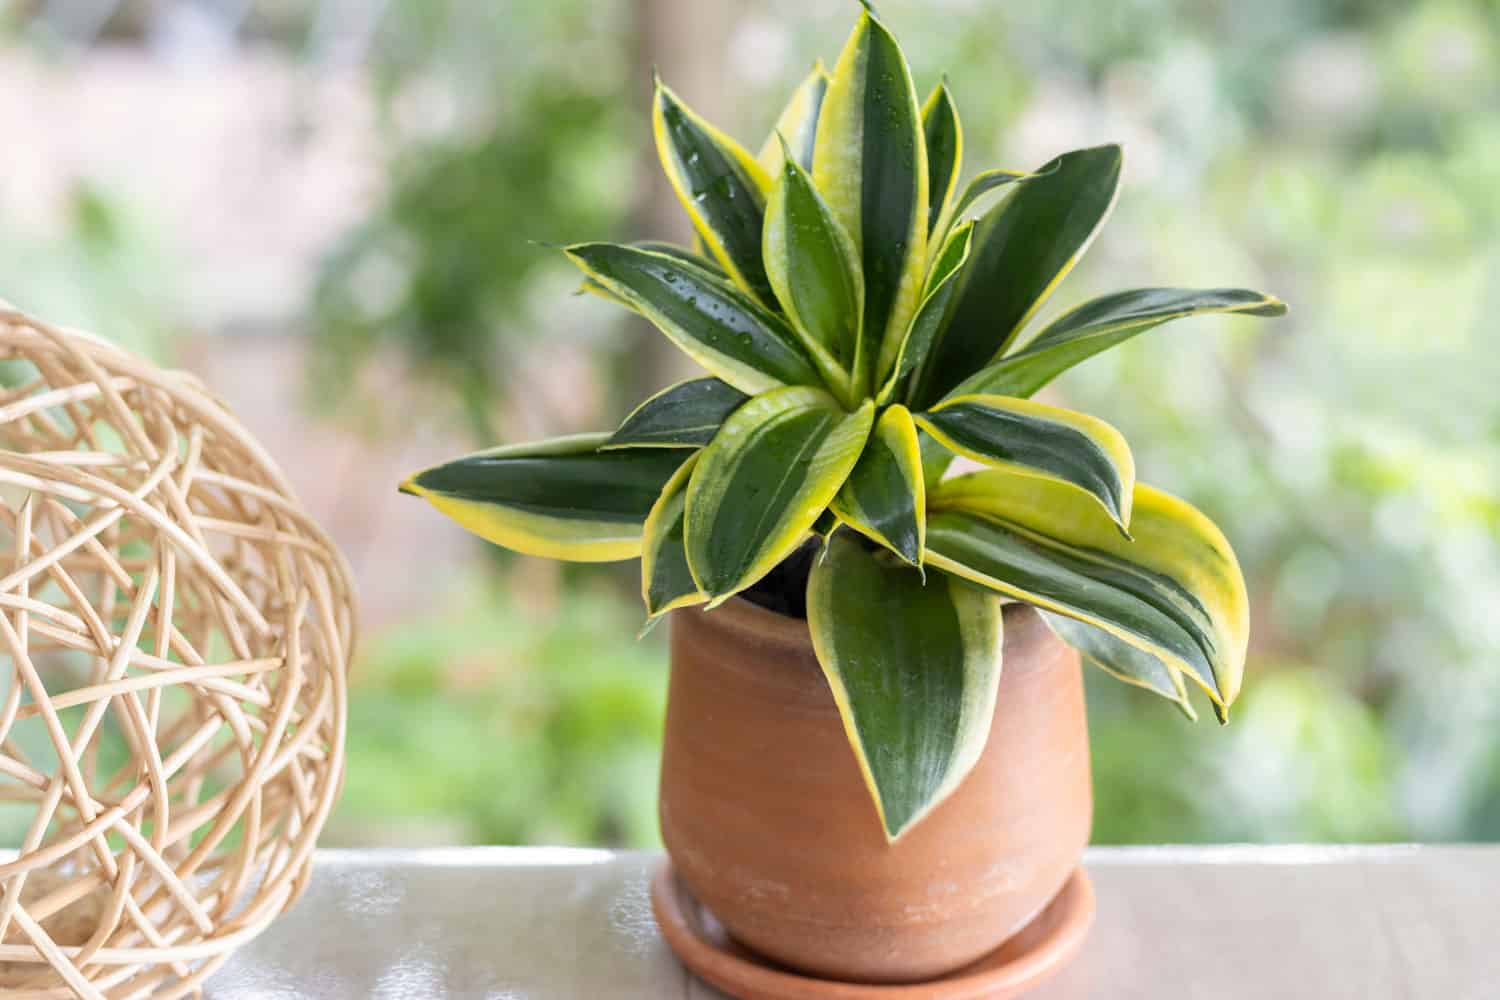 A snake plant with curled leaves